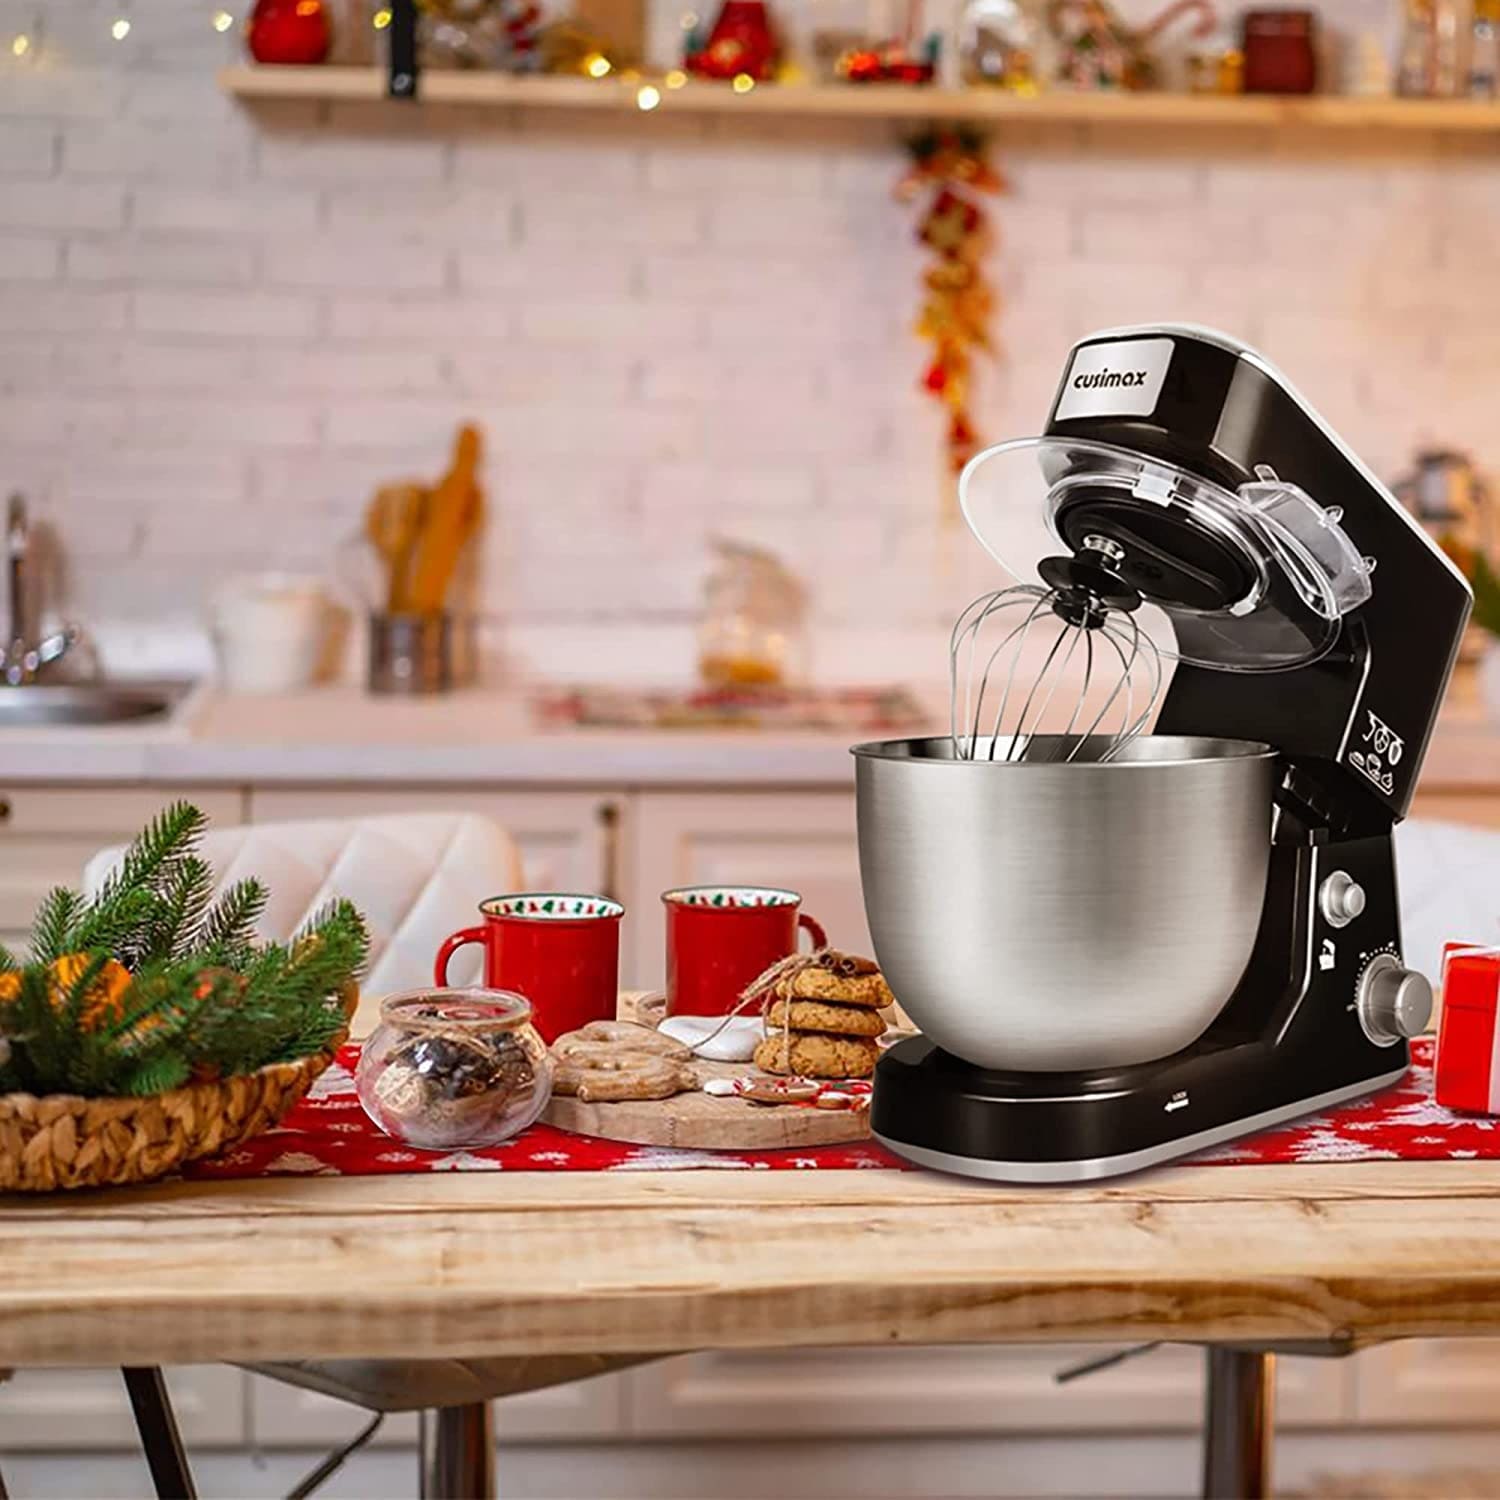 https://ak1.ostkcdn.com/images/products/is/images/direct/03f6080afa2a2dc87d75b8ba065297663fe7c5fb/Stand-Mixer%2C-Dough-Mixer-Tilt-Head-Electric-Mixer-with-5-Quart-Stainless-Steel-Bowl.jpg